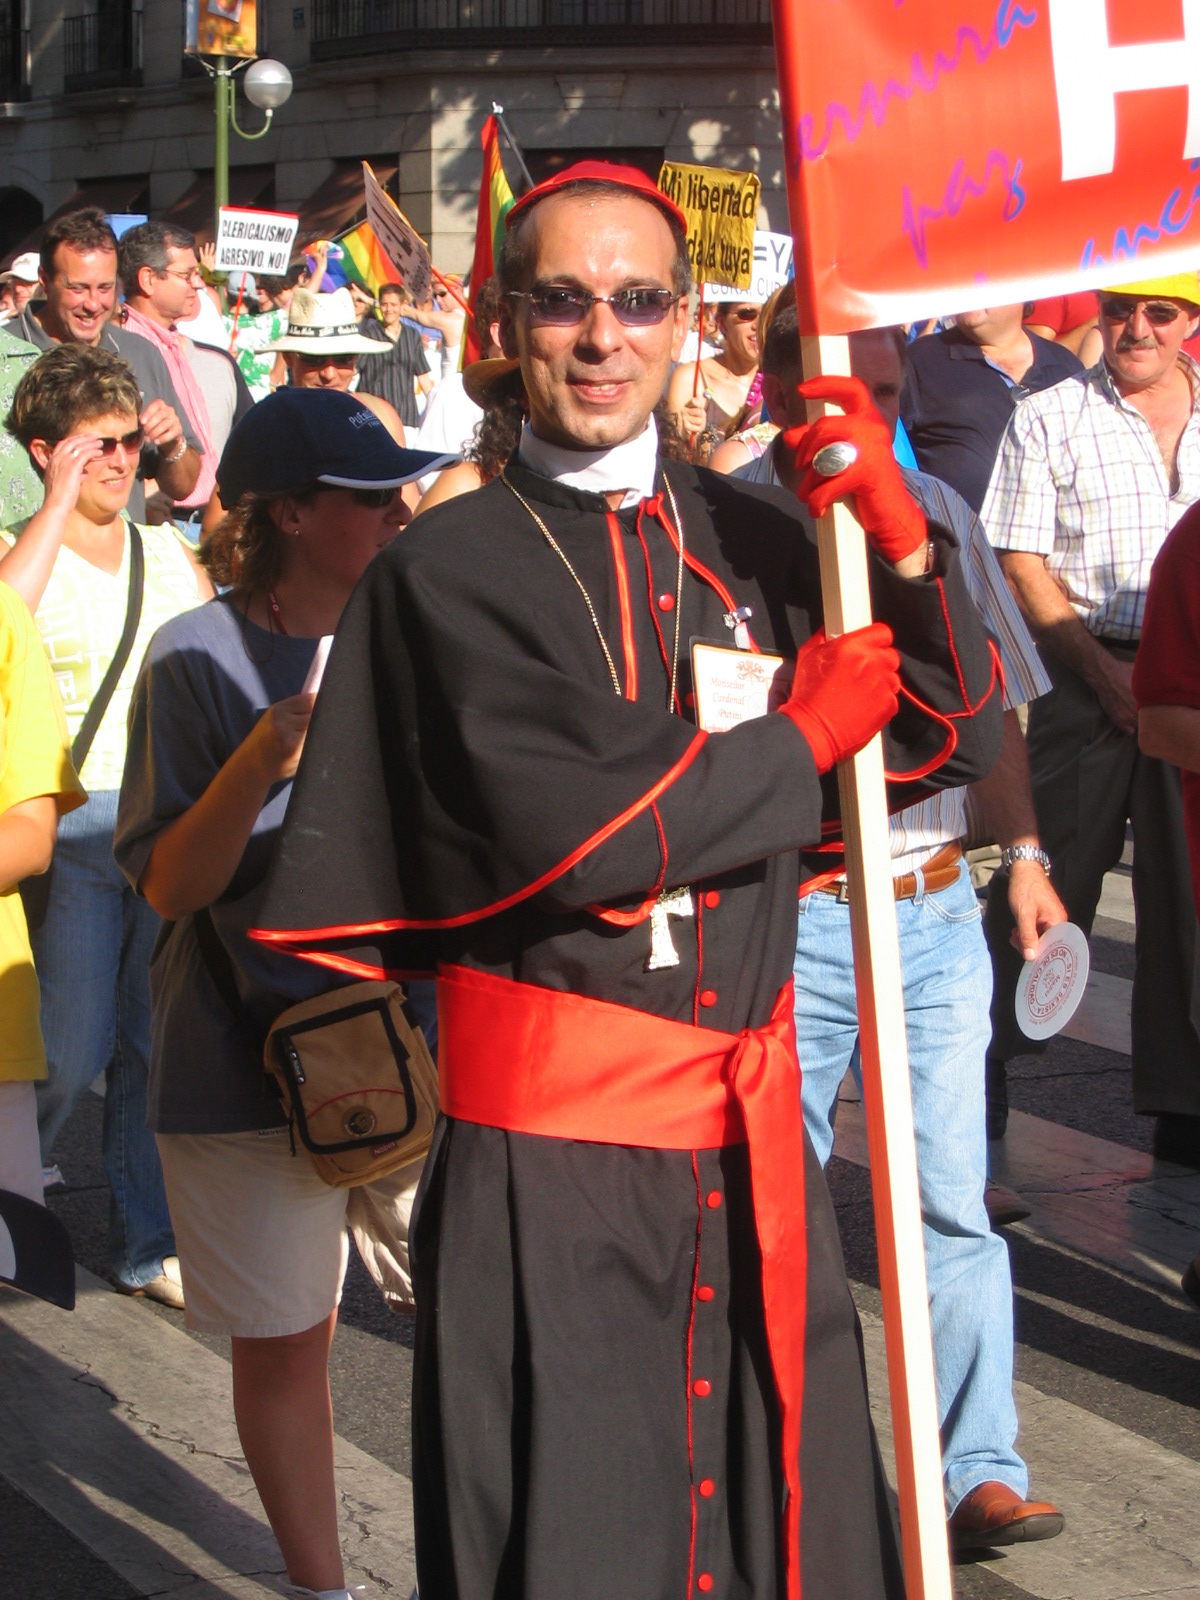 a priest carrying a sign in the street as people watch